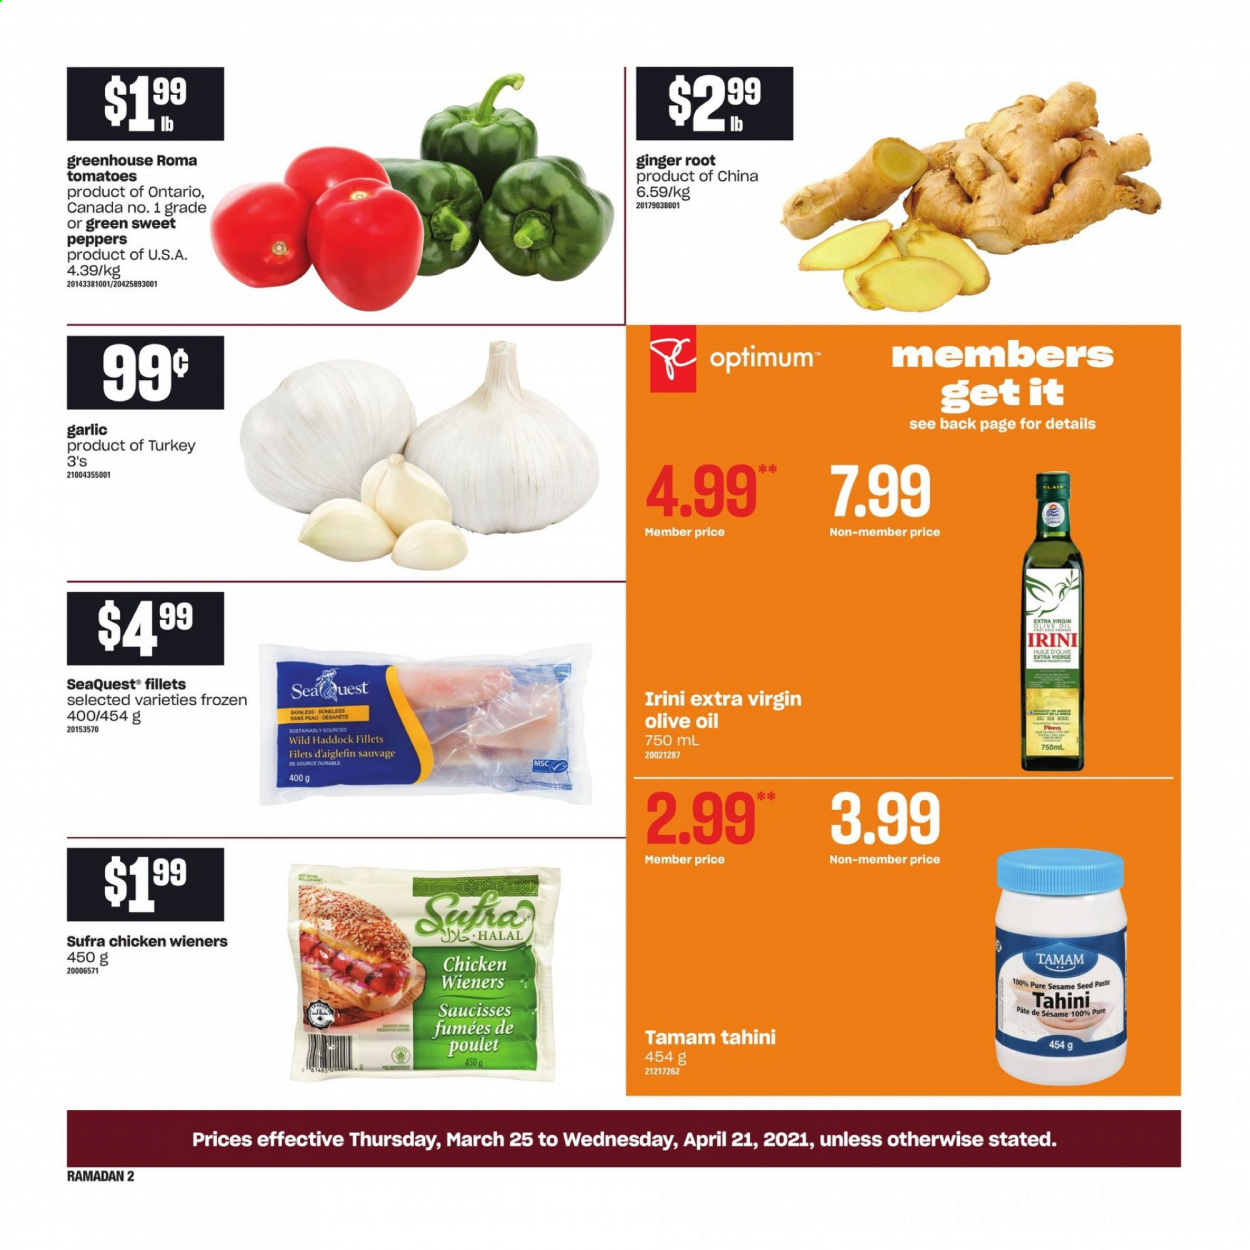 thumbnail - Loblaws Flyer - March 25, 2021 - April 21, 2021 - Sales products - garlic, ginger, tomatoes, haddock, sesame seed, tahini, extra virgin olive oil, olive oil, oil, Optimum. Page 2.